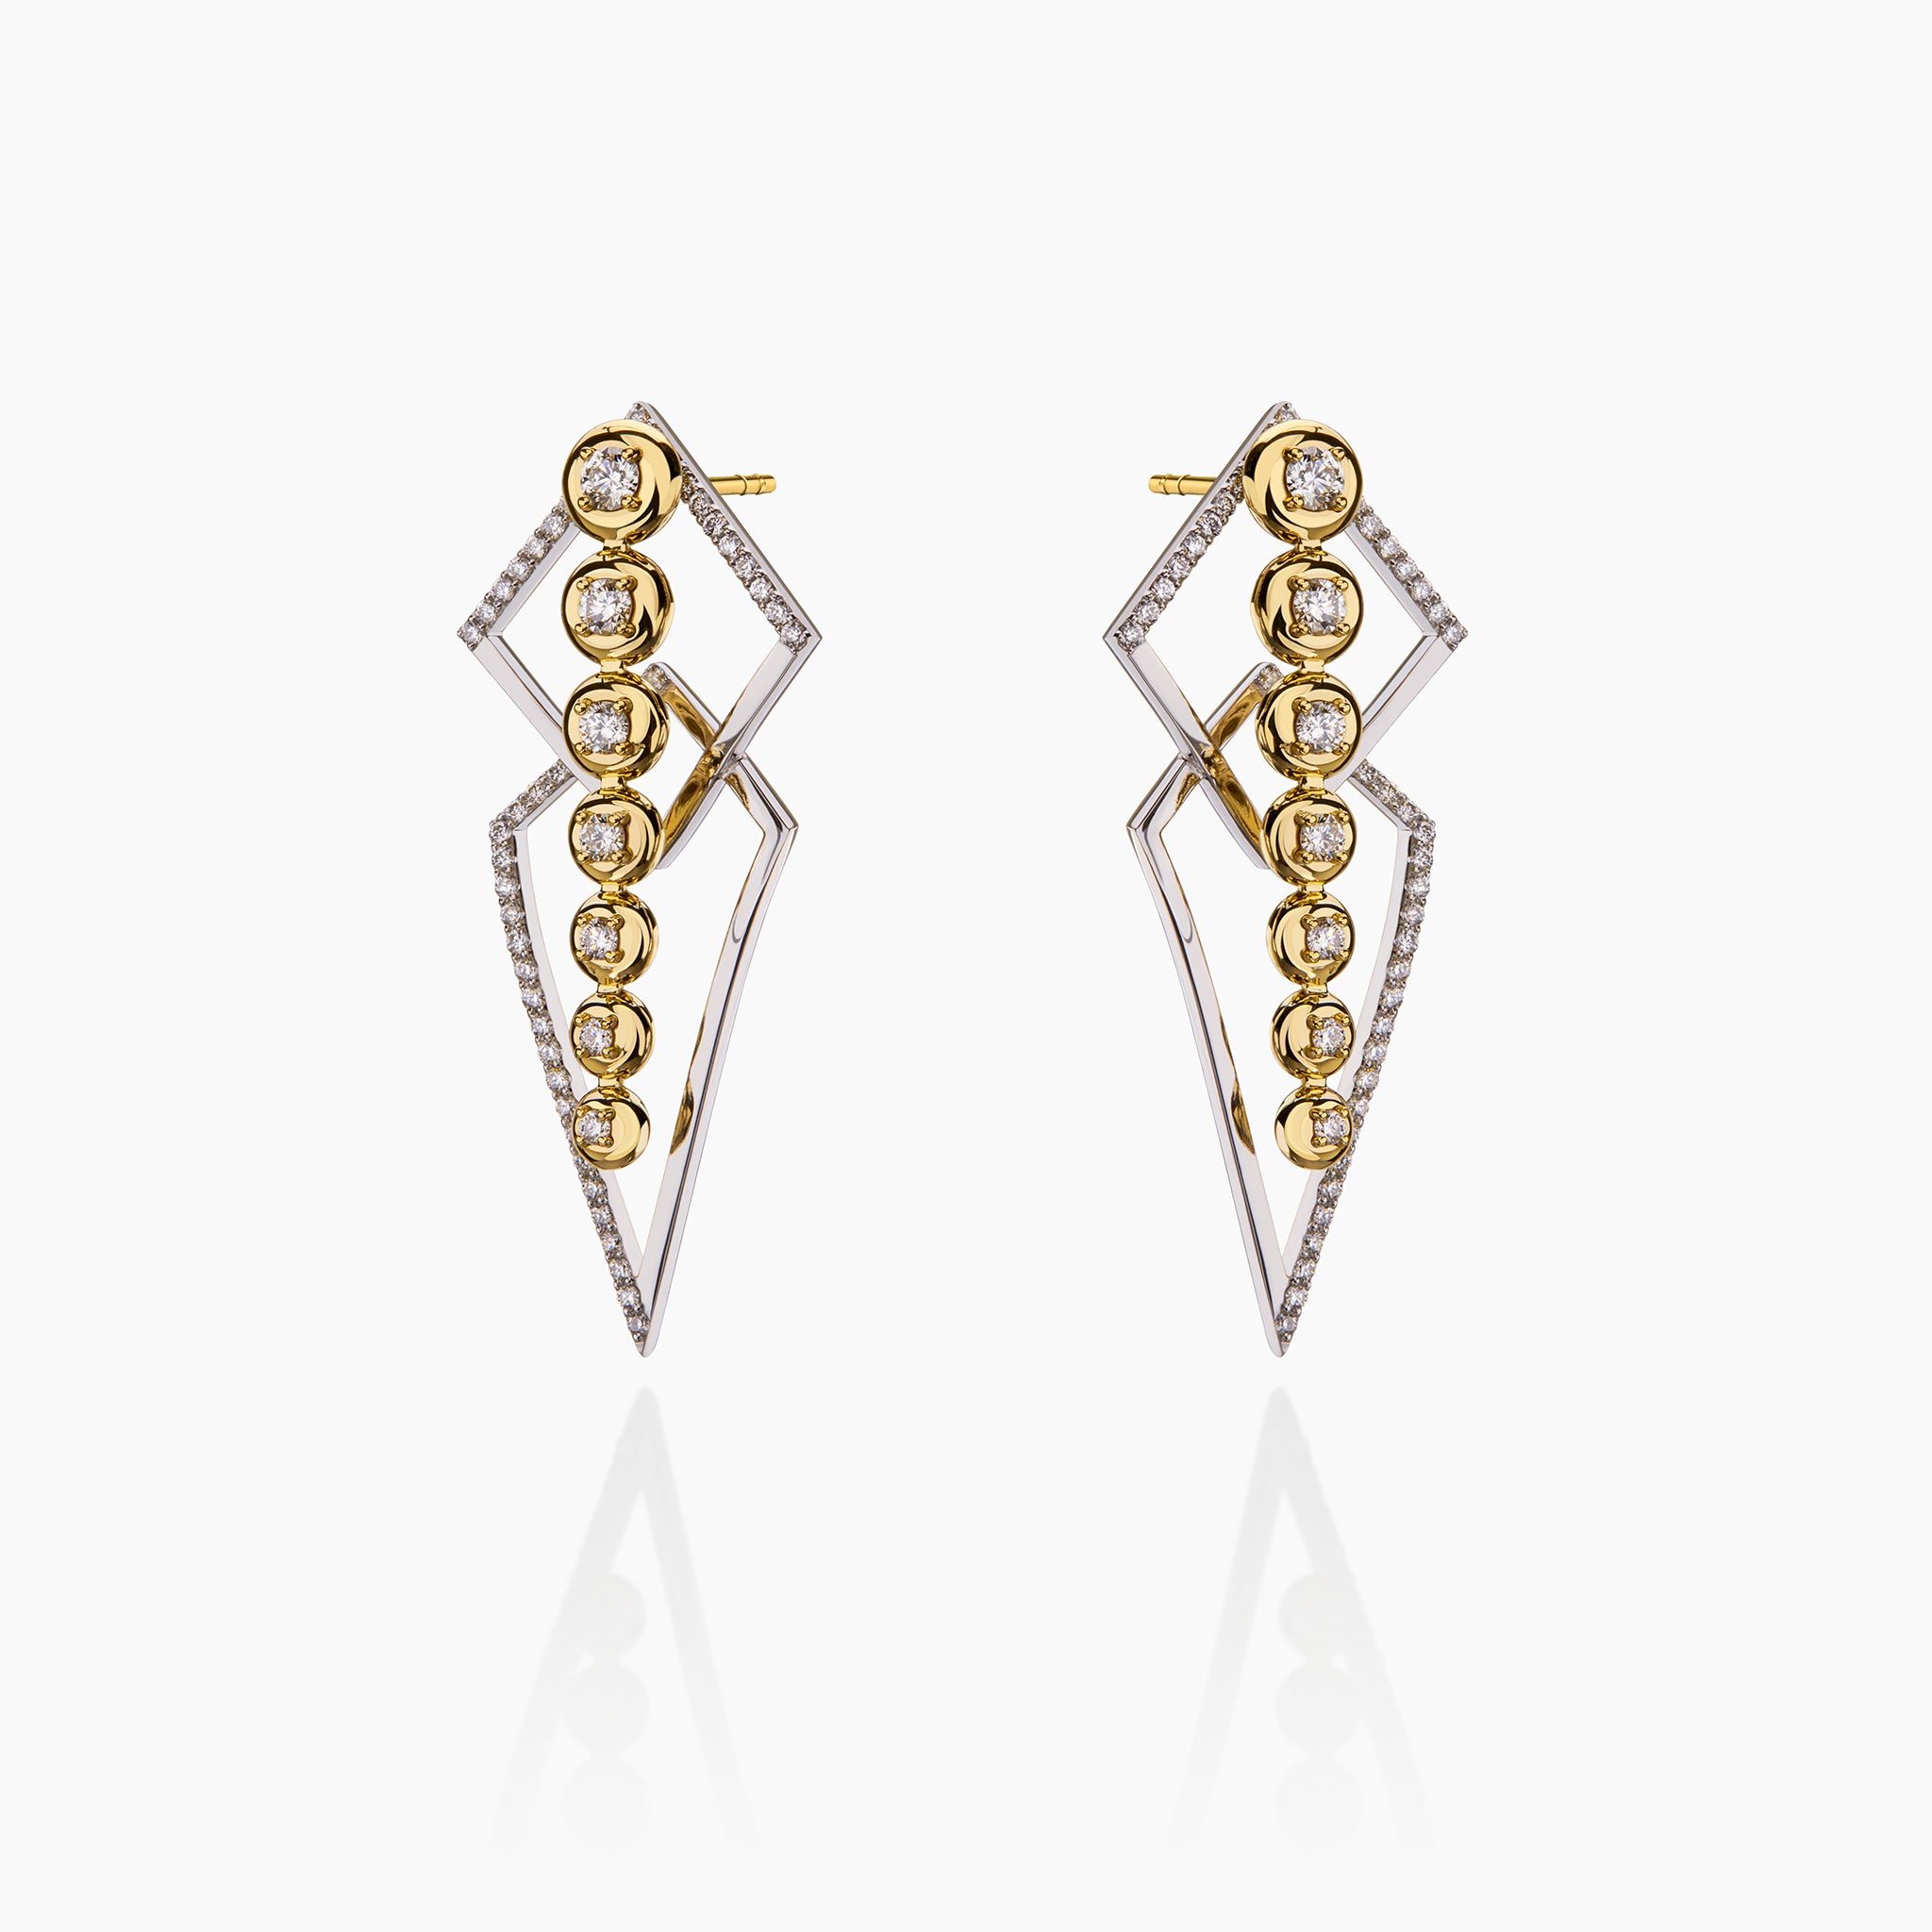 thunder and star trail earrings across an off white background depicting how the can be both worn together.